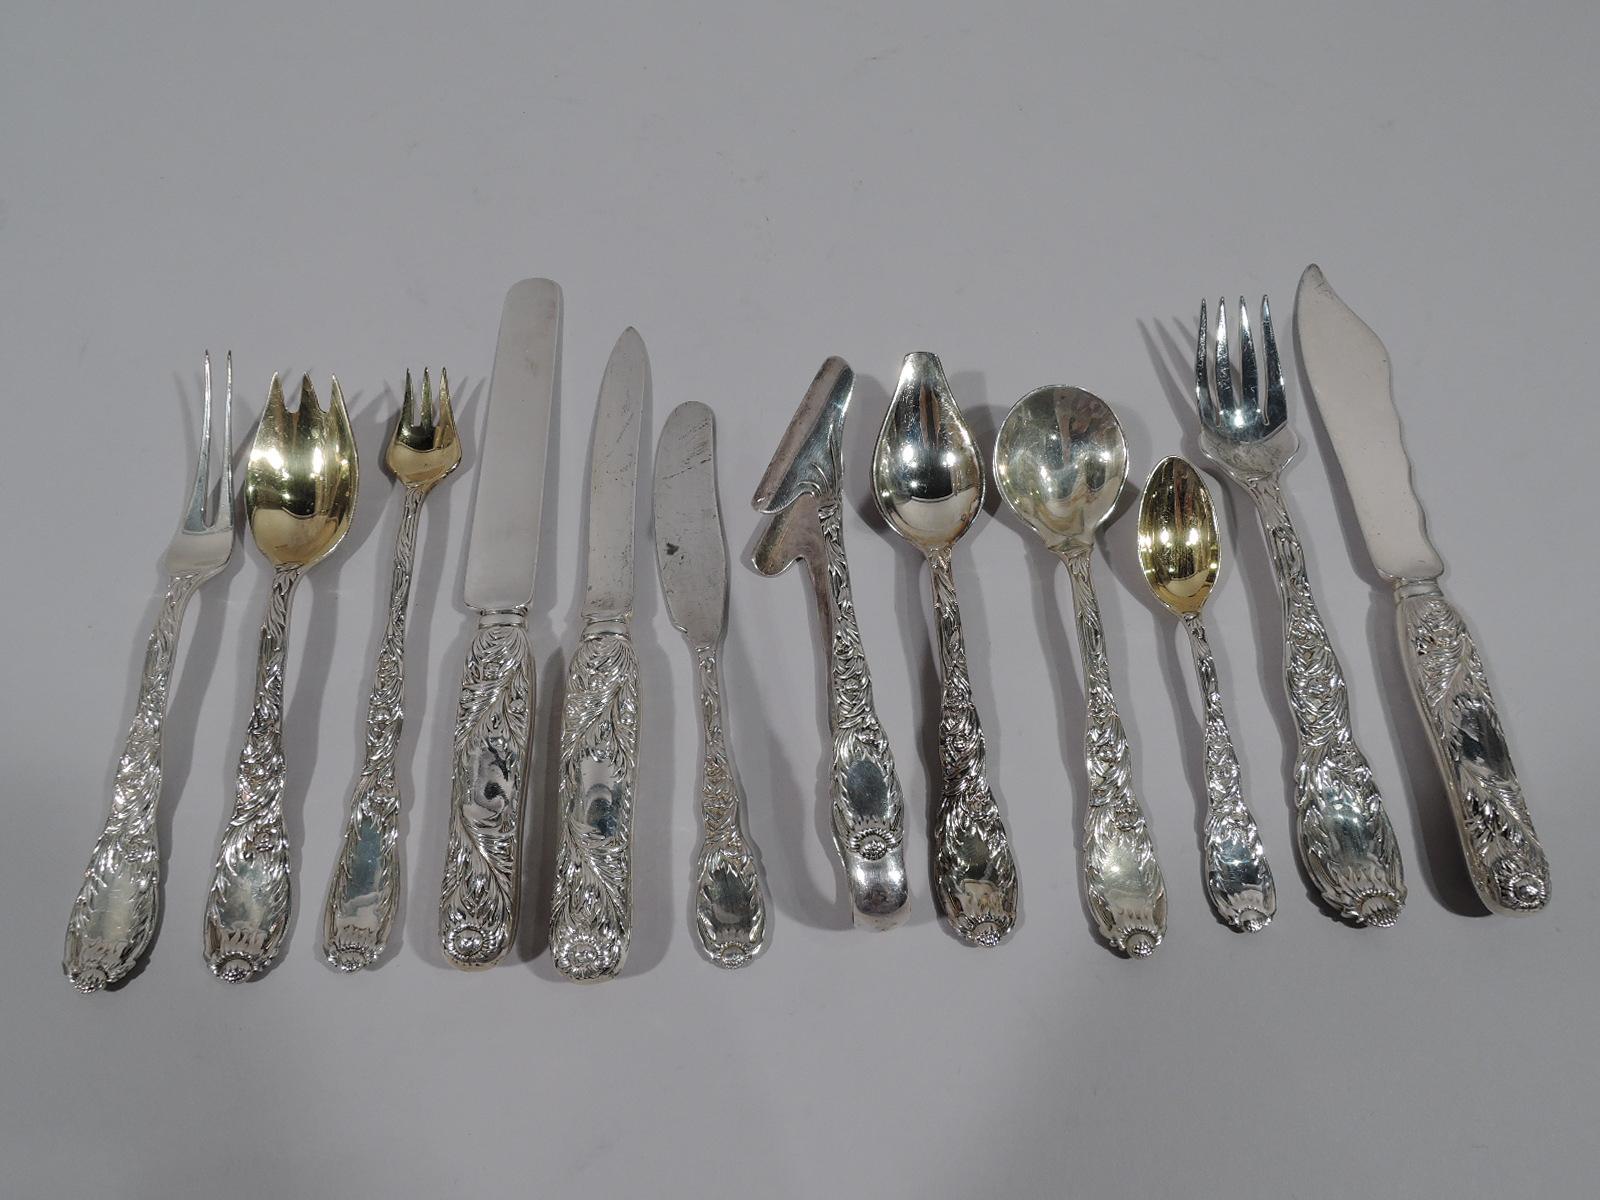 Chrysanthemum sterling silver dinner set for 12. Made by Tiffany & Co. in New York, circa 1910.

This set comprises 252 pieces (dimensions in inches): Knives: 12 dinner knives (10), 12 lunch knives (9), 12 breakfast knives (7 1/2), 12 fish knives